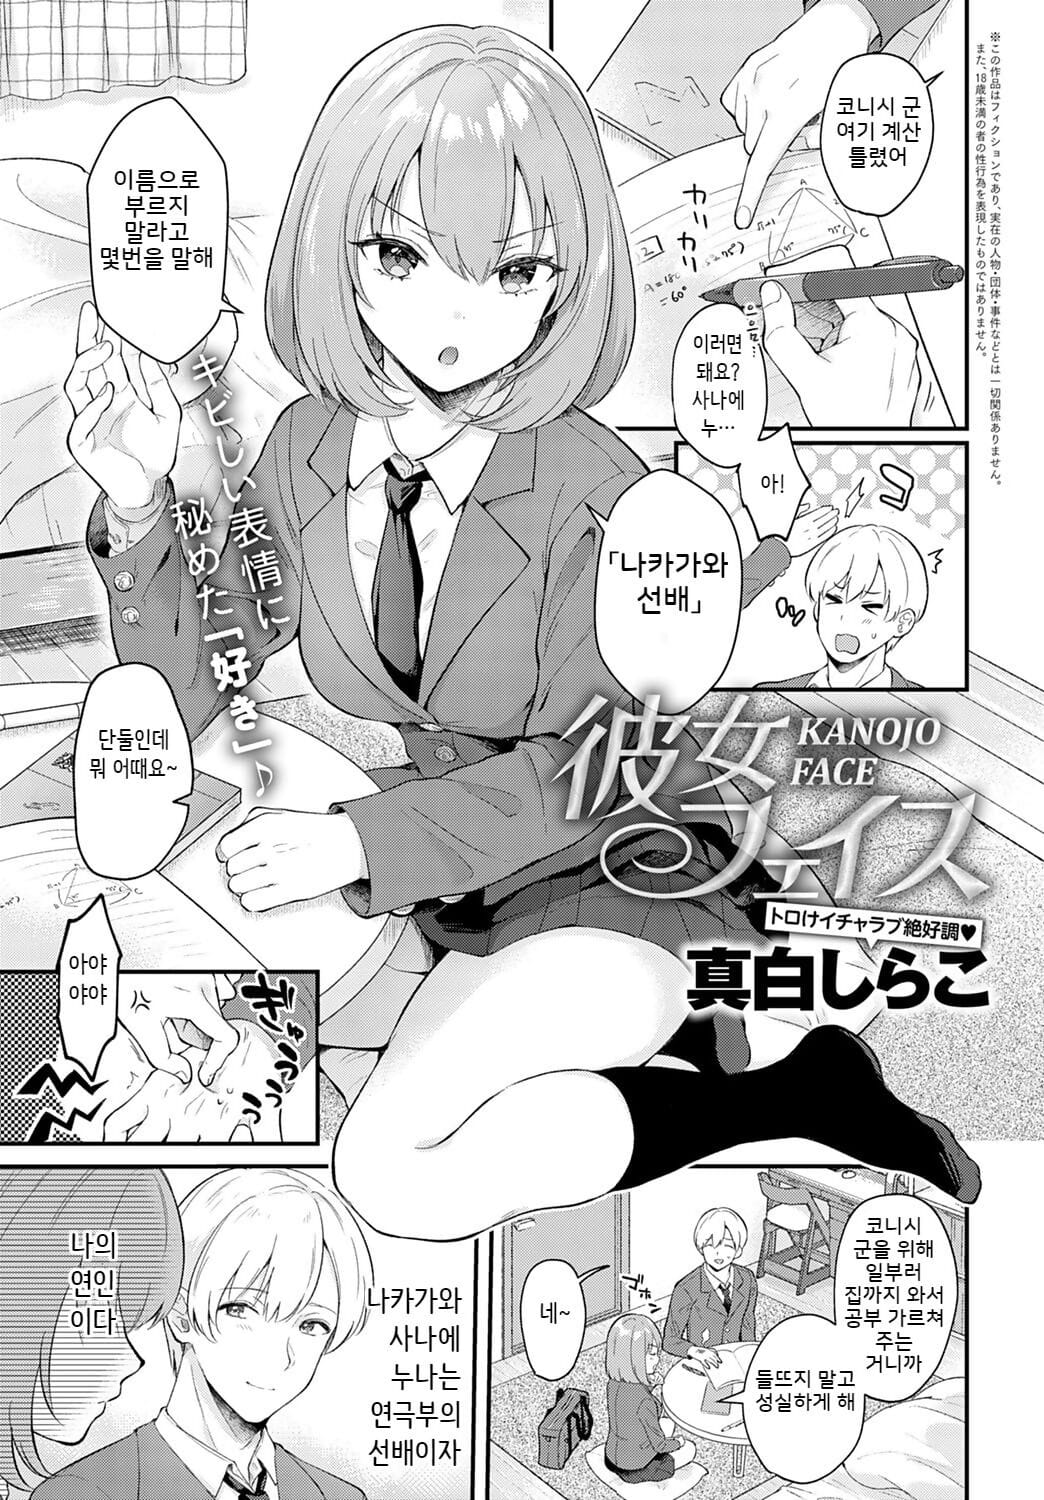 kanojo Gesicht page 1